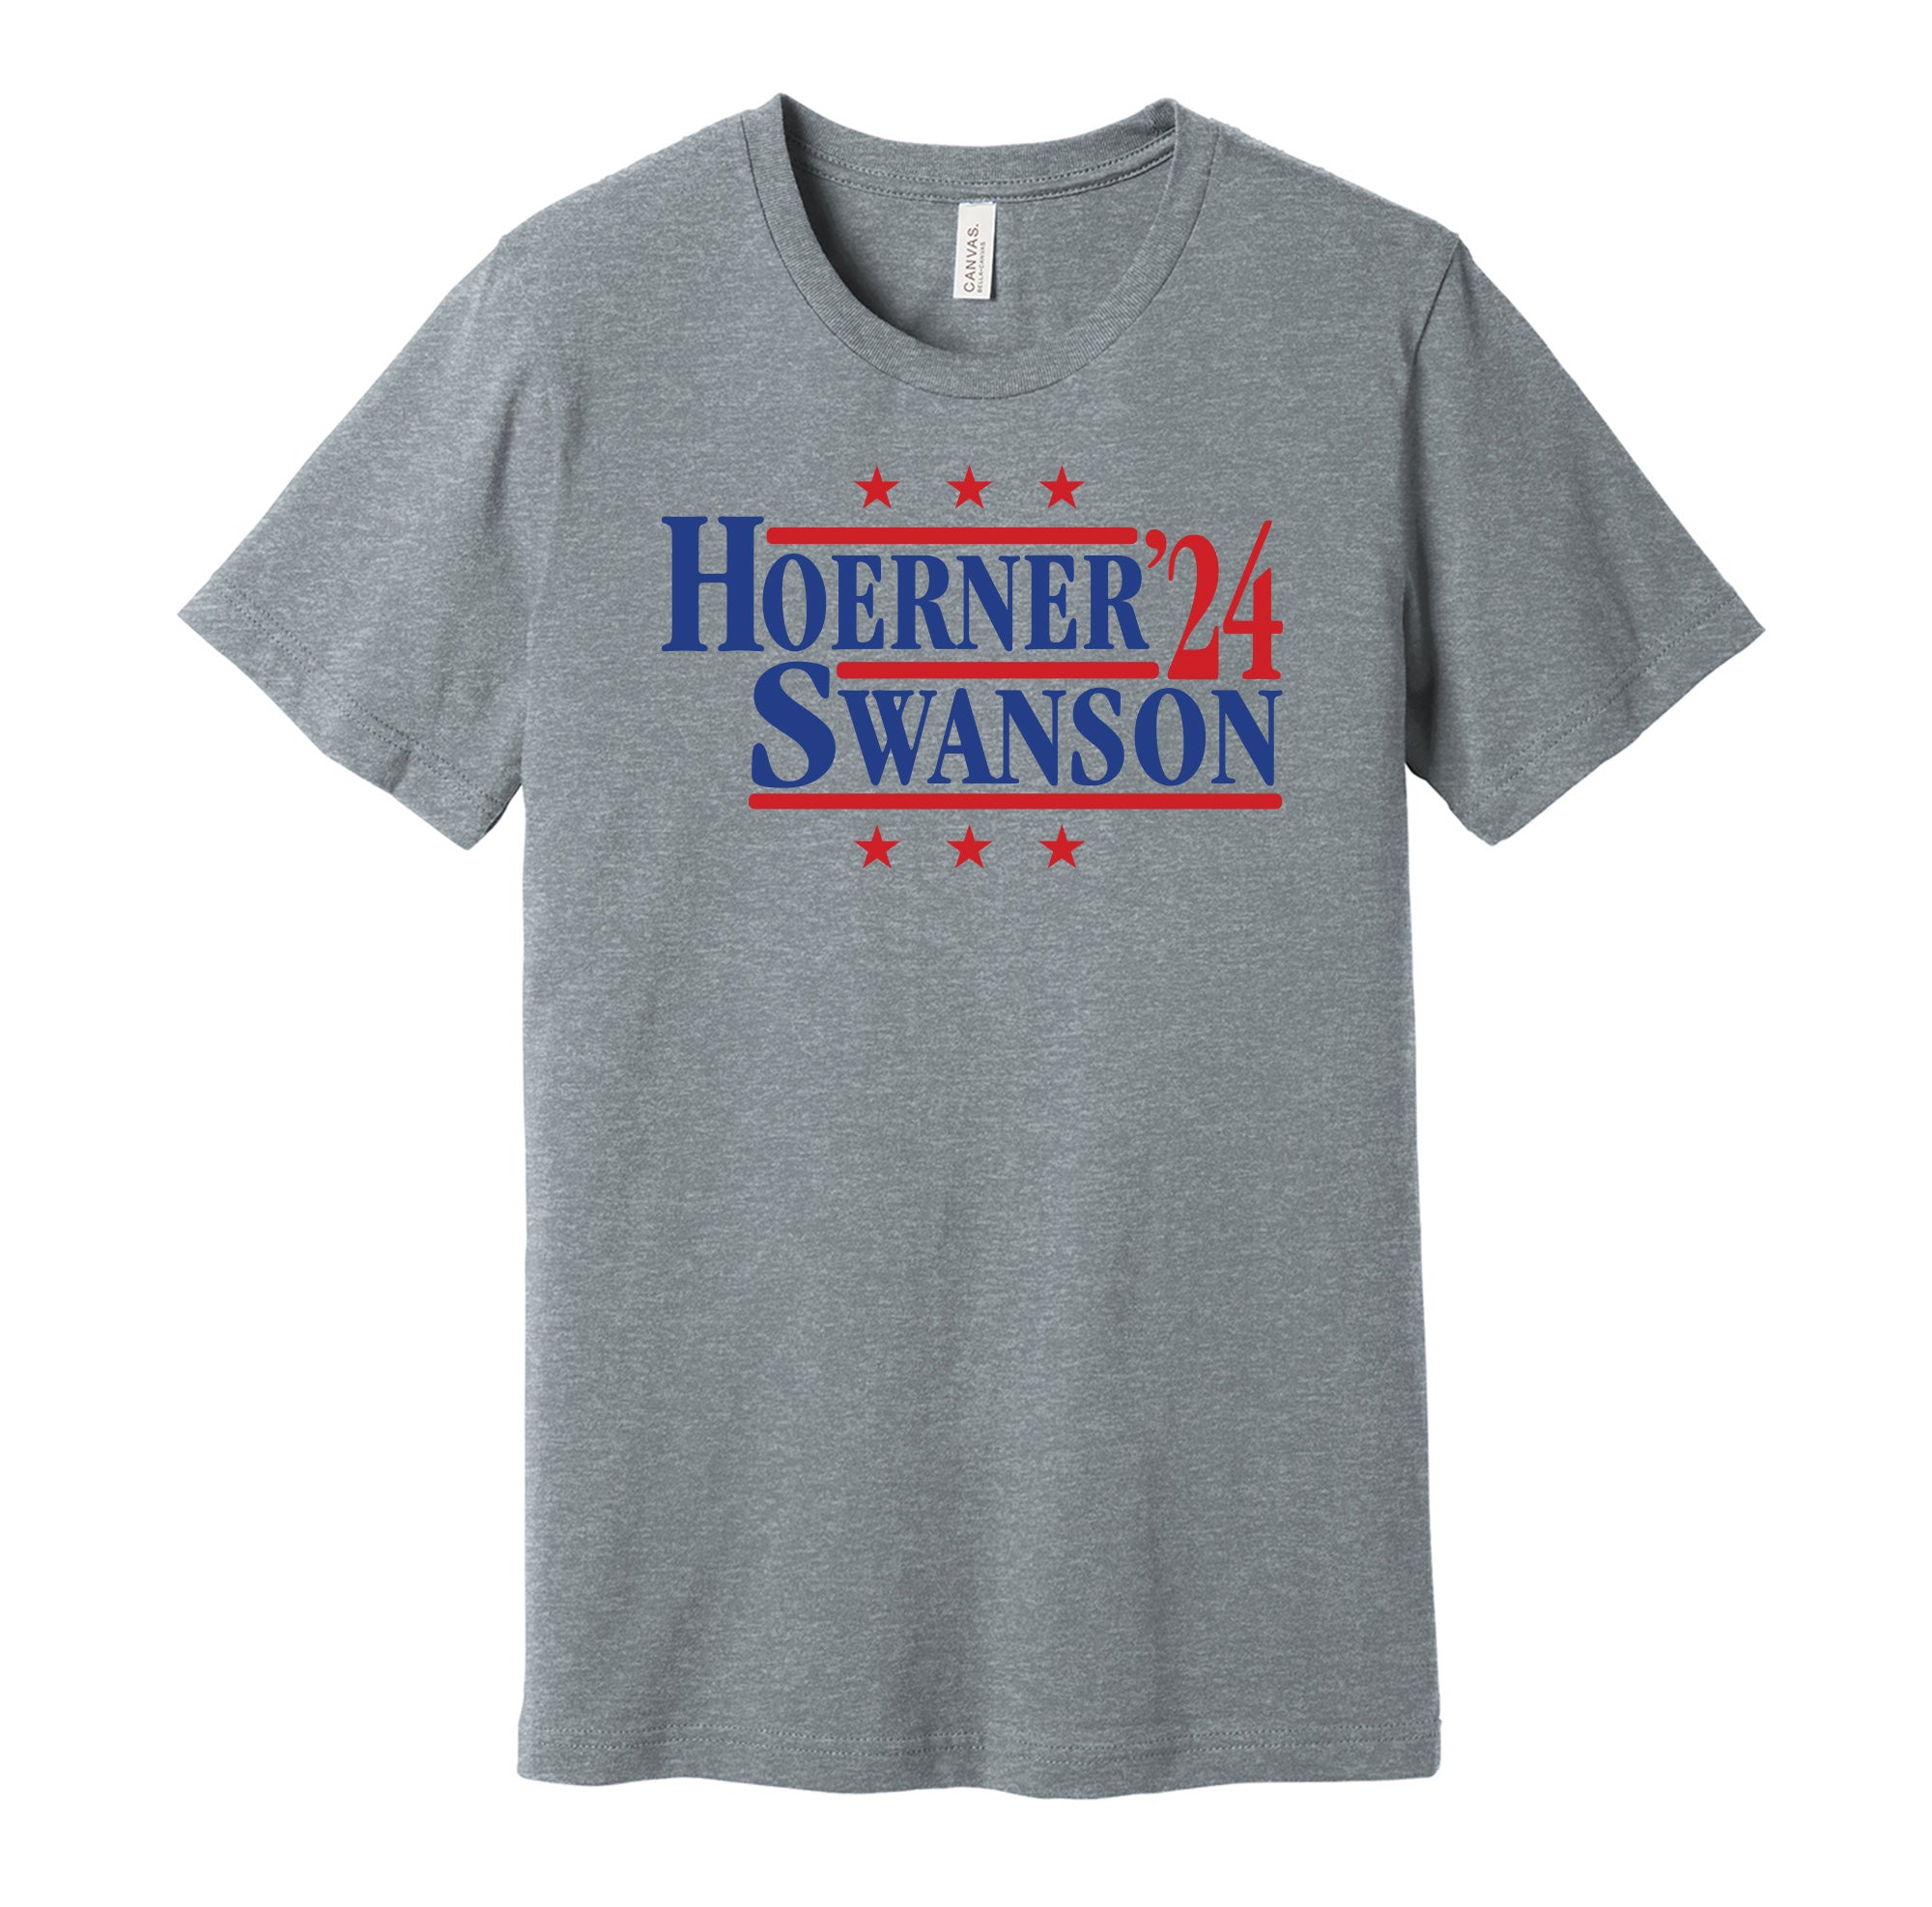 Hoerner & Swanson '24 - Chicago Political Campaign Parody T-Shirt - Hyper Than Hype Shirts S / Grey Shirt